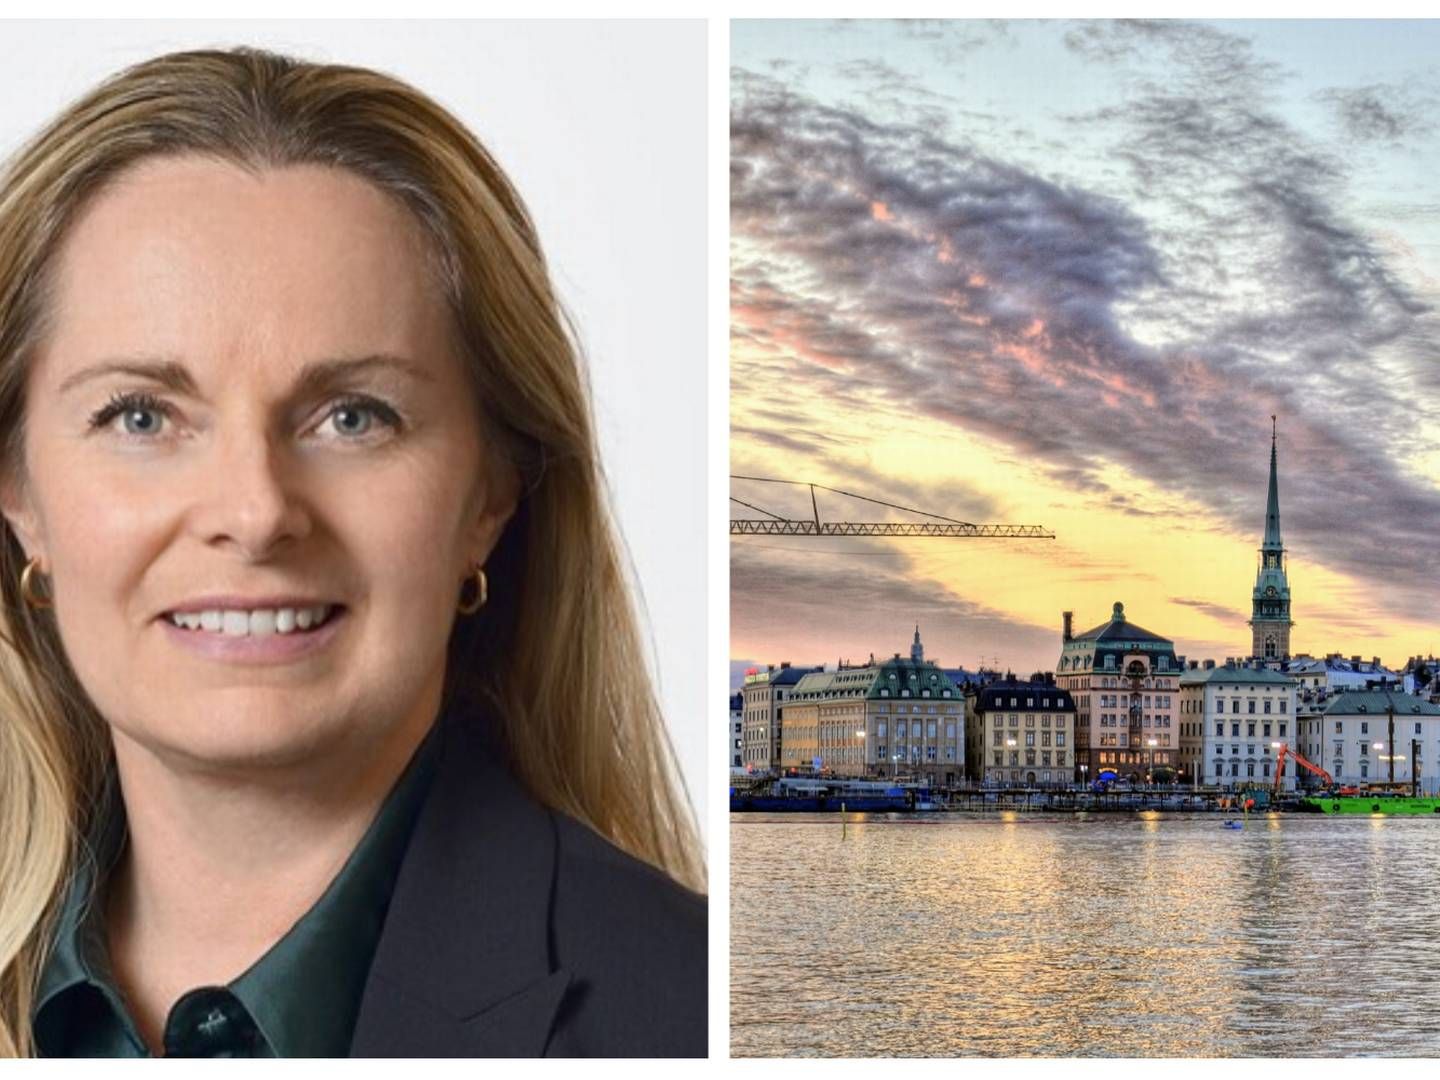 Apex Group has appoined Amanda Ekman as Country Head in Sweden, where it plans to hire 65 new people in its Stockholm office. | Photo: Sanne Group PR (l.) and Pexels: Jan Židlický (r.).